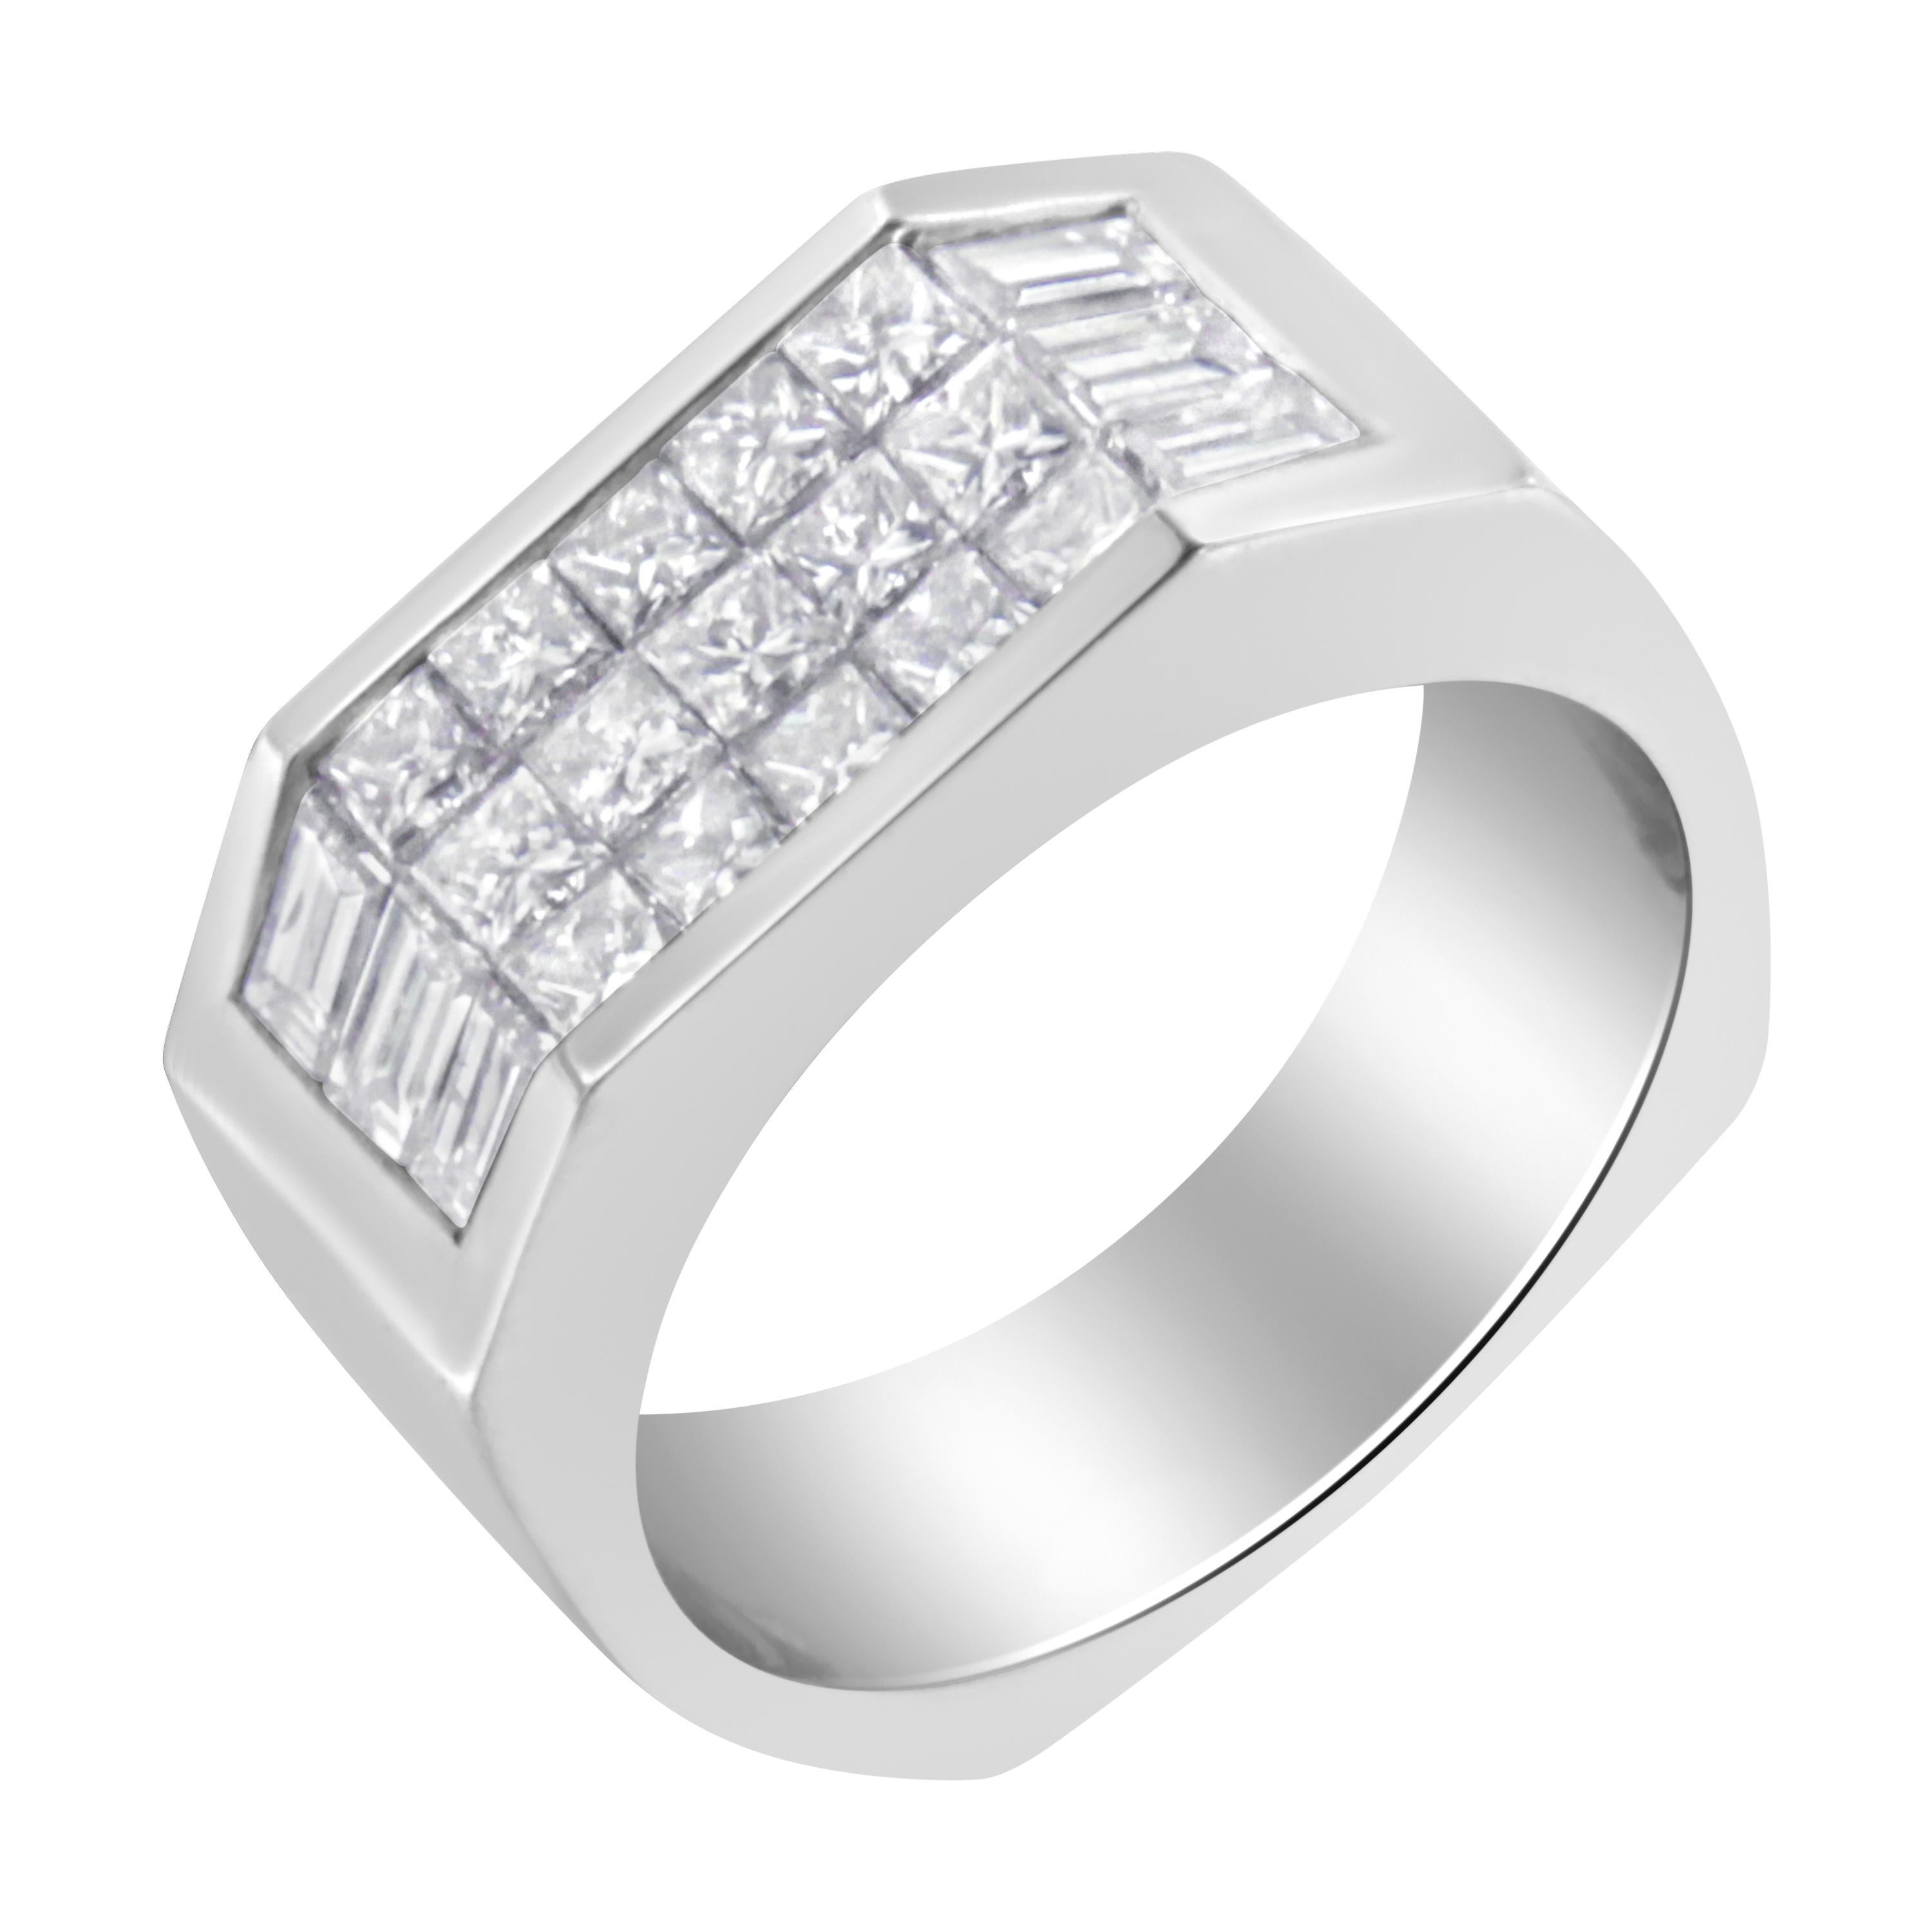 14K White Gold 1 3/4 Carat Channel Set Diamond Ring Band In New Condition For Sale In New York, NY